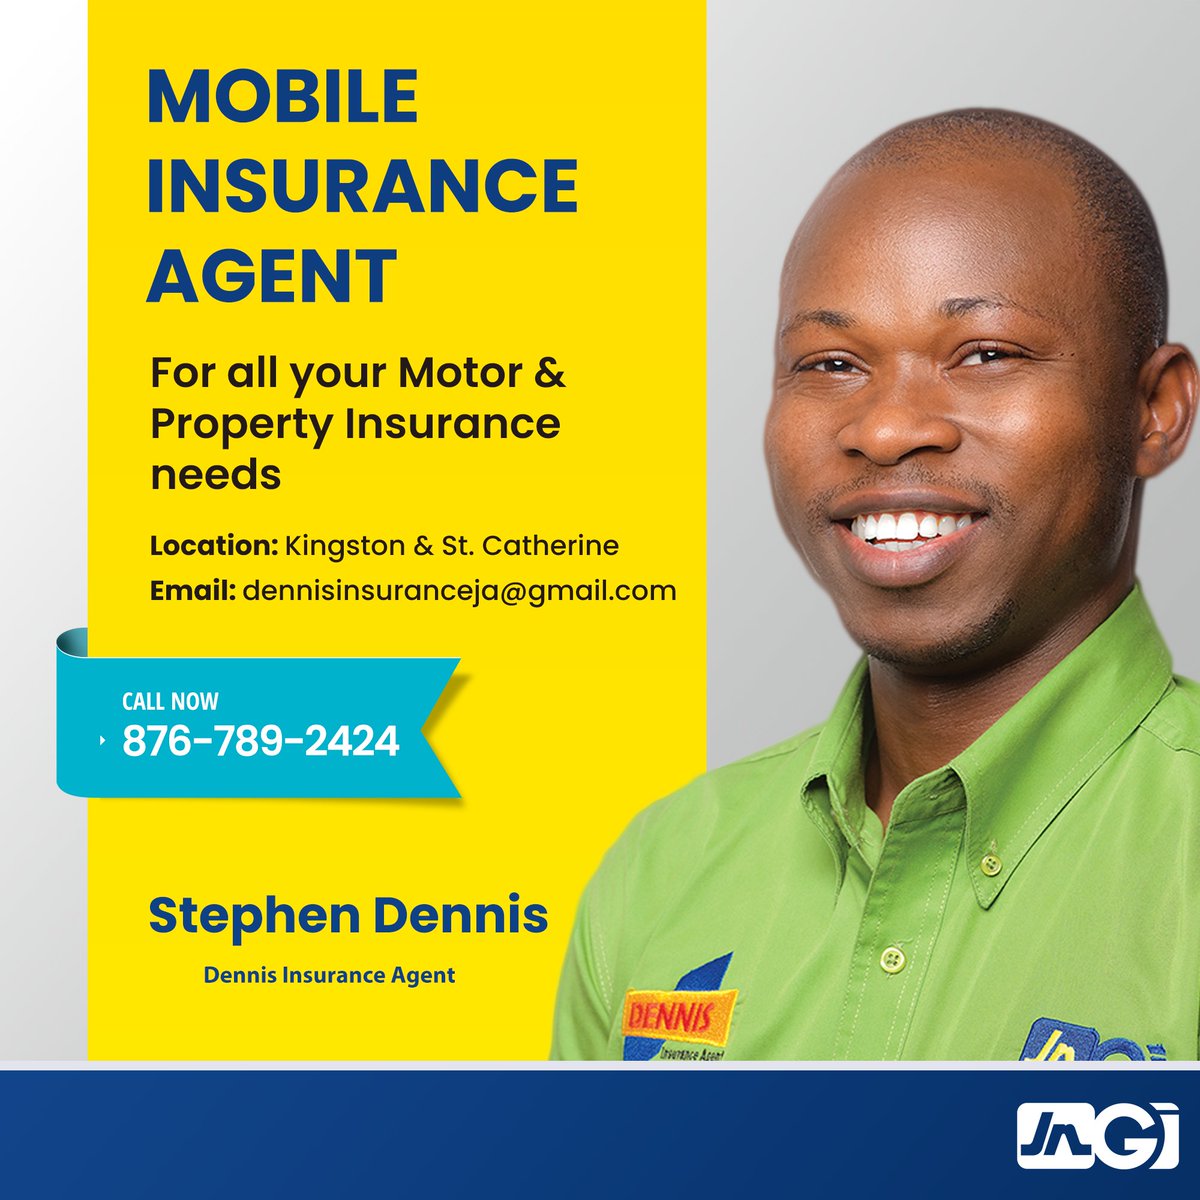 For all your mobile and property insurance needs, our skilled Mobile Insurance Agents are here to assist you! Contact Stephen today for personalized service.
Click the link in our bio for more information.

#JNGeneralInsurance #JNGI #InsuranceAgent